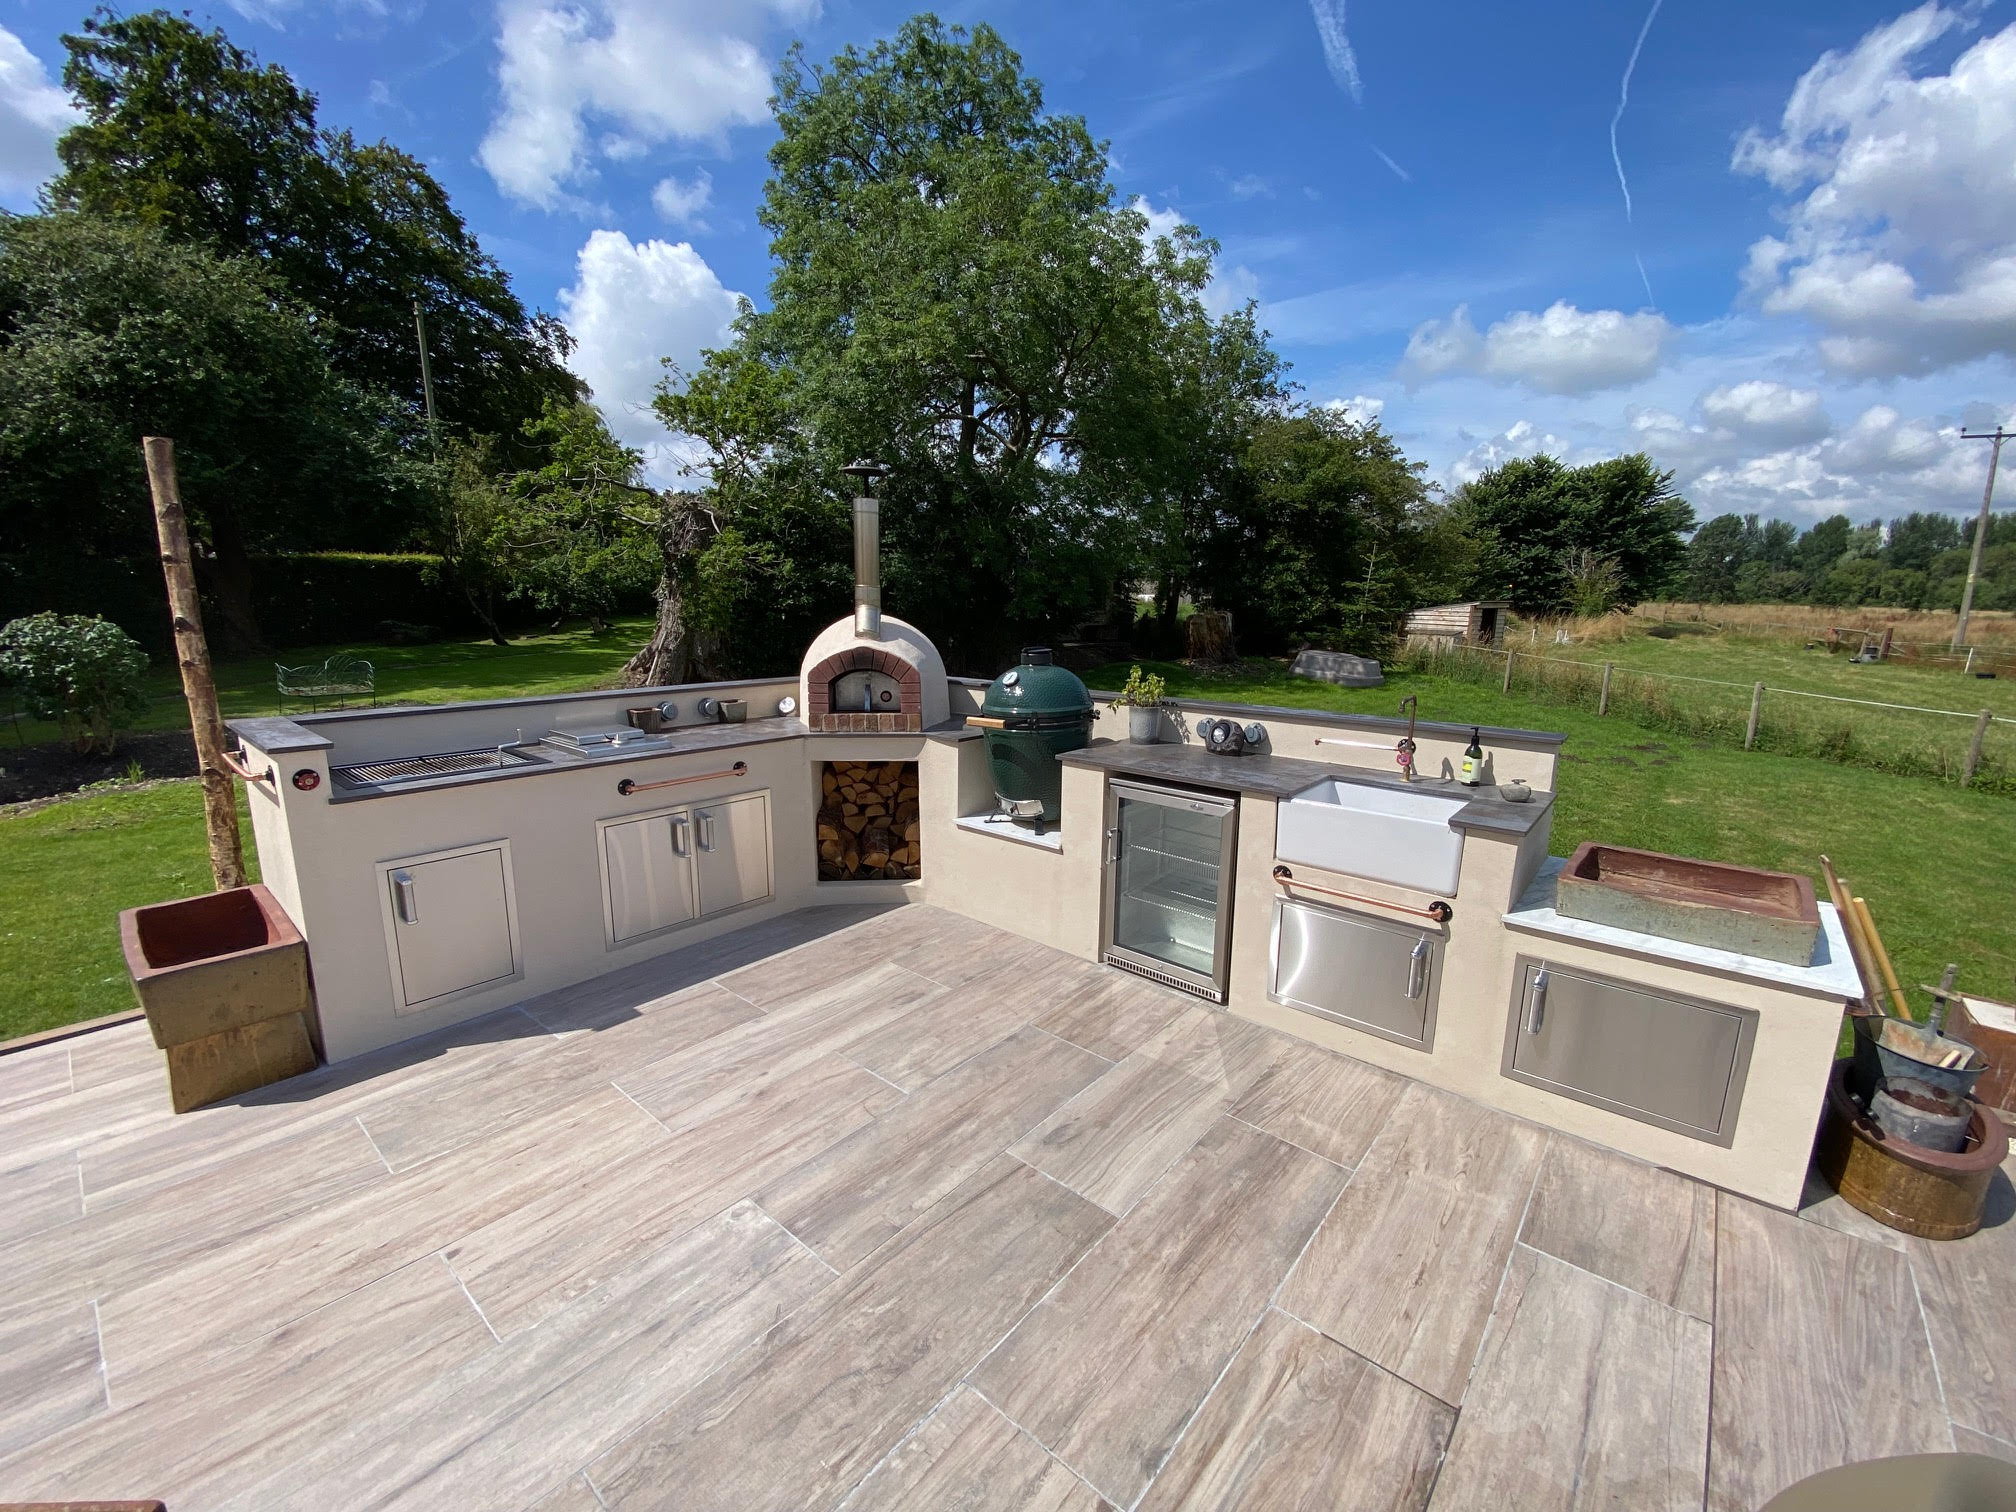 rendered country garden outdoor kitchen, with built in pizza oven and space for outdoor fridge